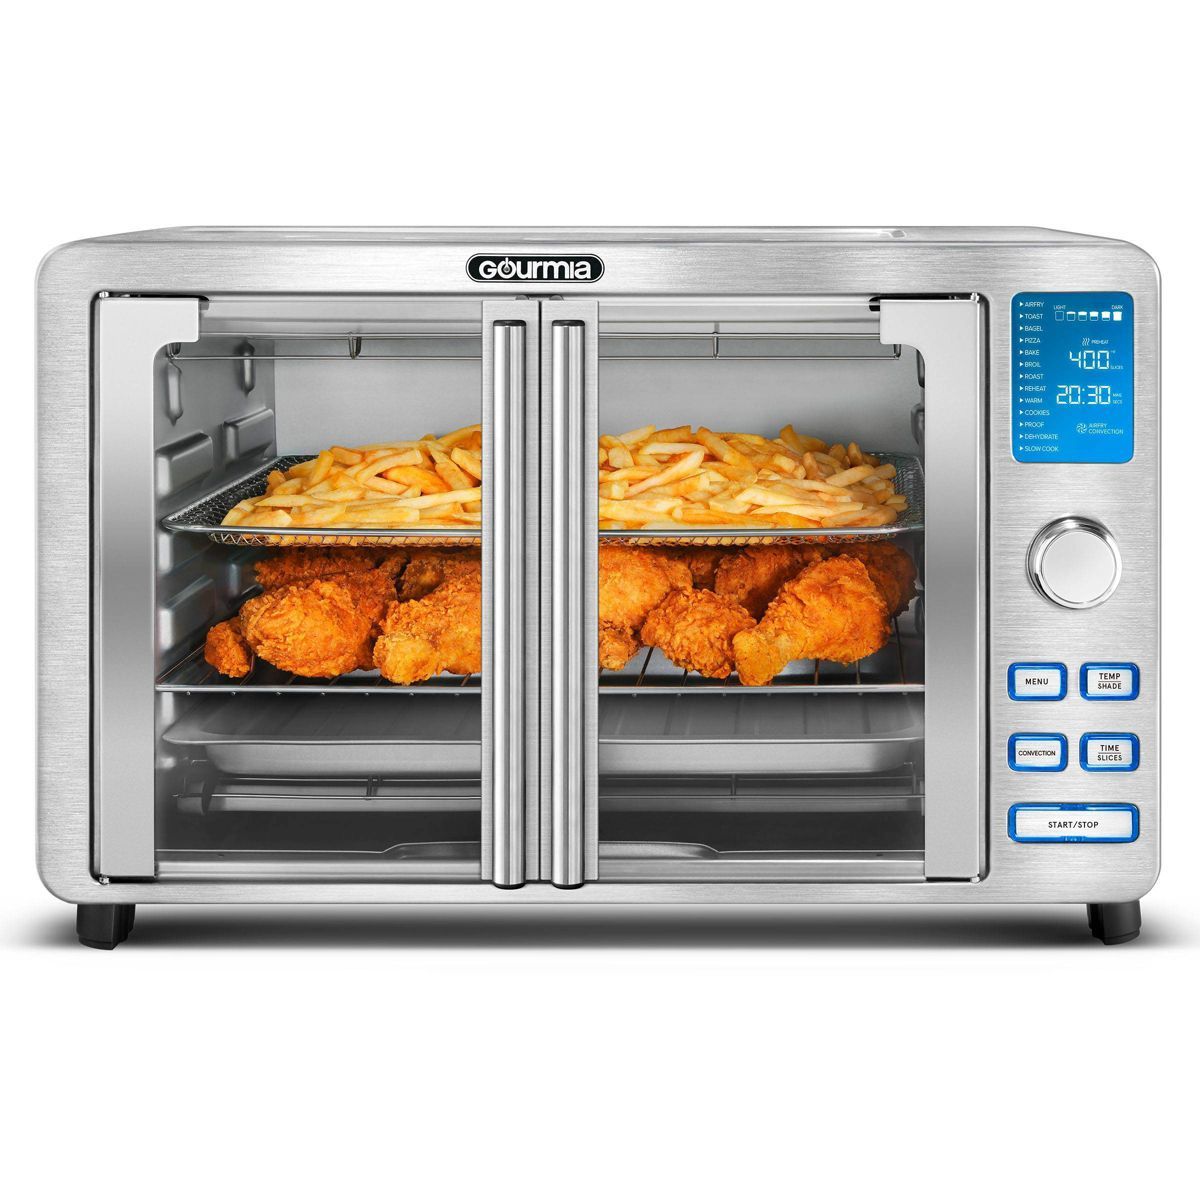 Gourmia 9-Slice Digital Air Fryer Oven with 14 One-Touch Cooking Functions and Auto French Doors | Target